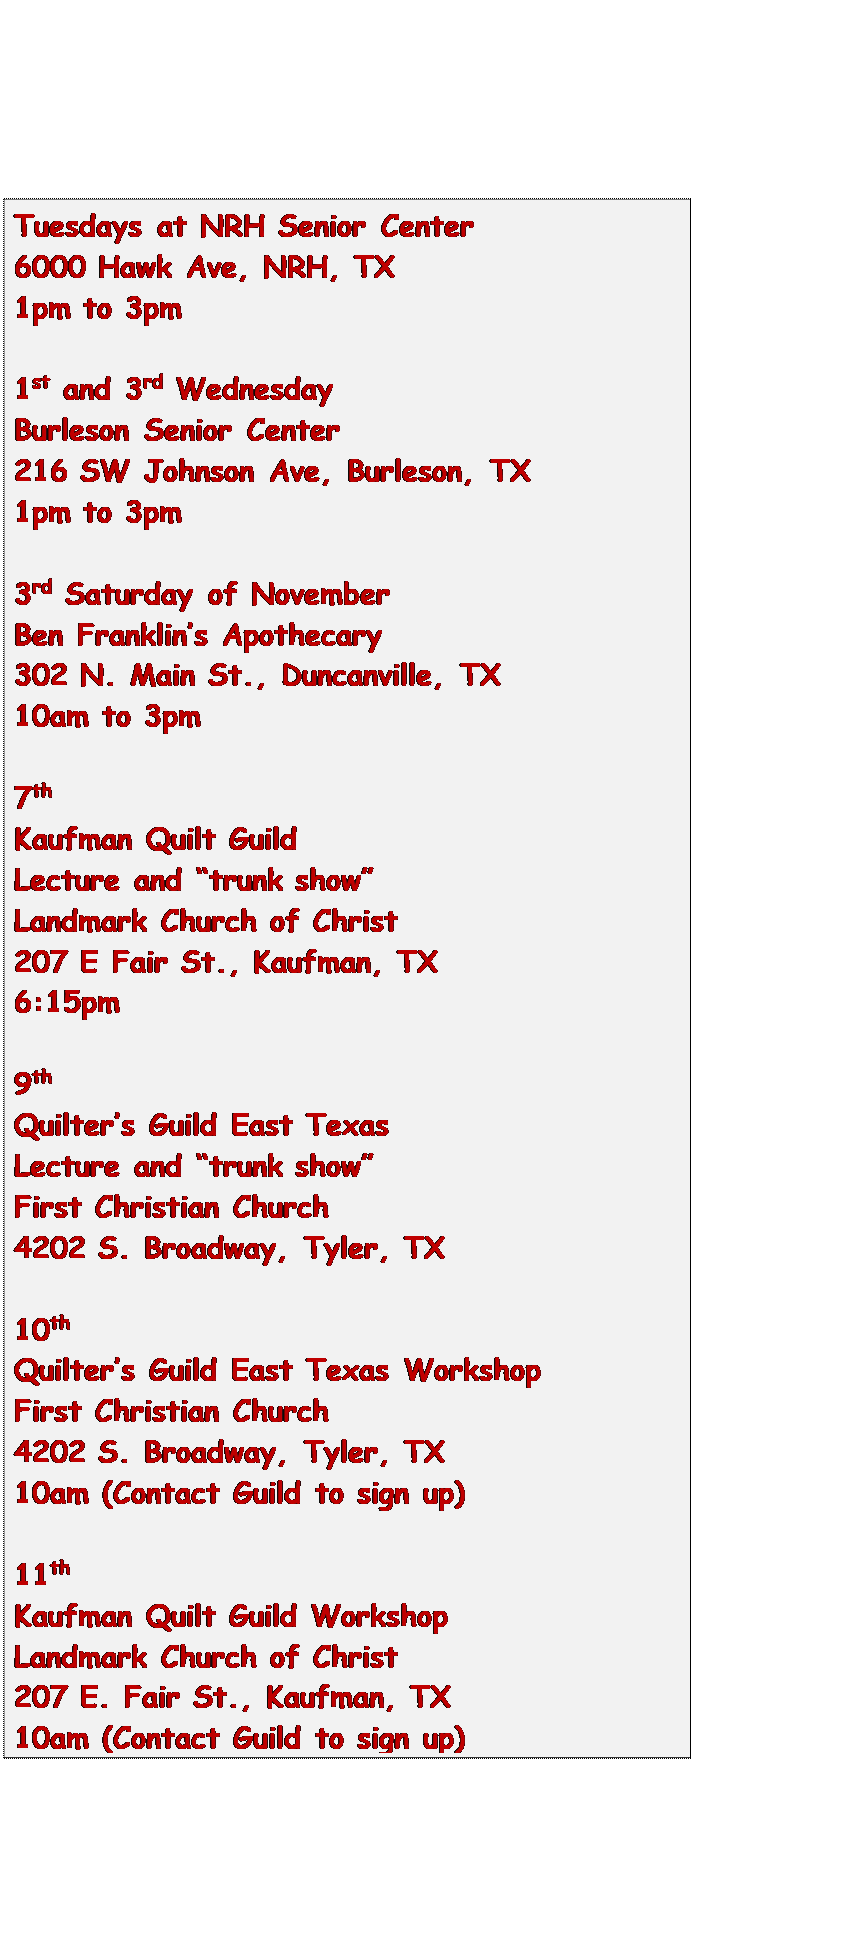 Text Box: Tuesdays at NRH Senior Center
6000 Hawk Ave, NRH, TX
1pm to 3pm

1st and 3rd Wednesday
Burleson Senior Center
216 SW Johnson Ave, Burleson, TX
1pm to 3pm

3rd Saturday of November
Ben Franklins Apothecary
302 N. Main St., Duncanville, TX
10am to 3pm

7th
Kaufman Quilt Guild
Lecture and trunk show
Landmark Church of Christ
207 E Fair St., Kaufman, TX
6:15pm

9th
Quilters Guild East Texas
Lecture and trunk show
First Christian Church
4202 S. Broadway, Tyler, TX

10th
Quilters Guild East Texas Workshop
First Christian Church
4202 S. Broadway, Tyler, TX
10am (Contact Guild to sign up)

11th
Kaufman Quilt Guild Workshop
Landmark Church of Christ
207 E. Fair St., Kaufman, TX
10am (Contact Guild to sign up)

